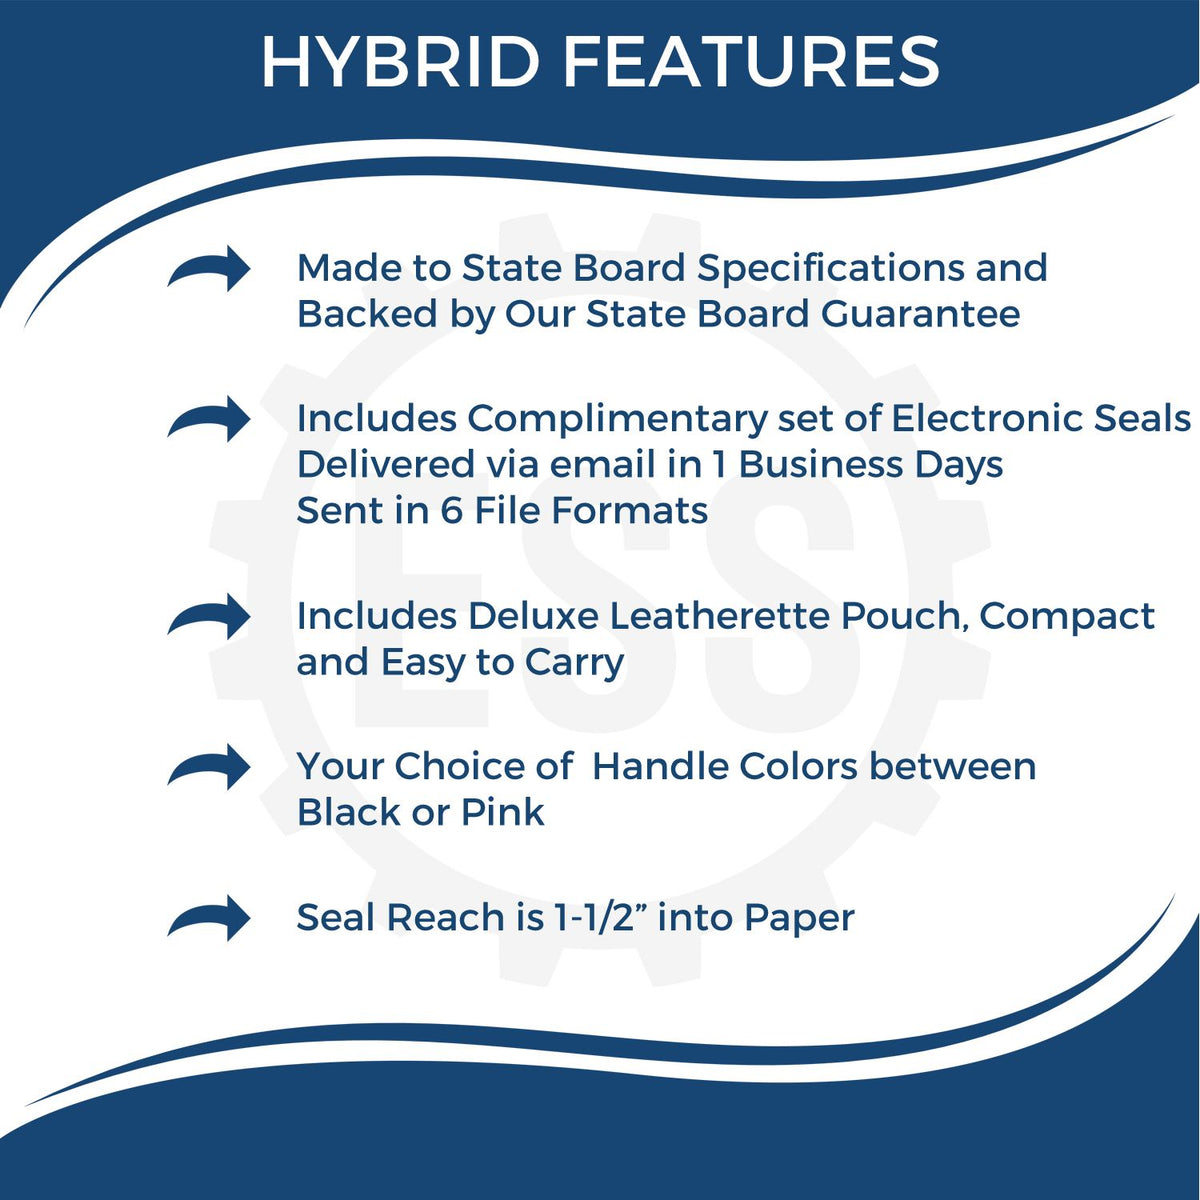 A picture of an infographic highlighting the selling points for the Hybrid Connecticut Engineer Seal